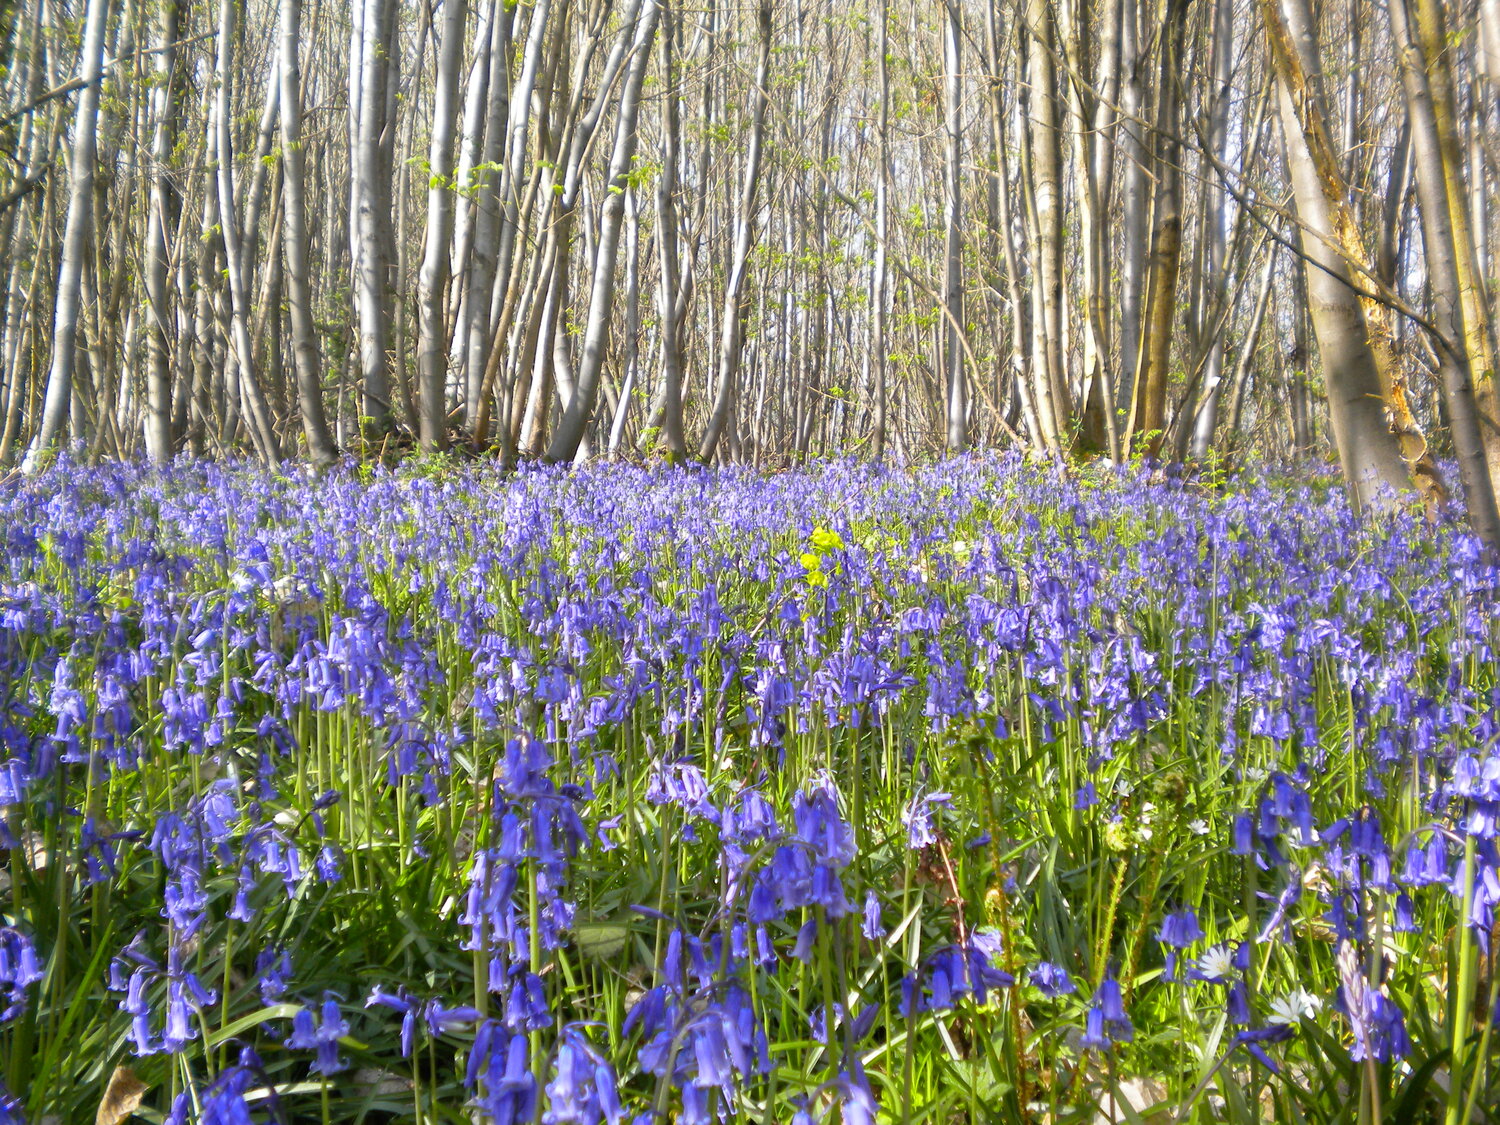 Old coppice woods are irreplaceable habitats for rare species, including these bluebells - a species associated with ancient woodlands